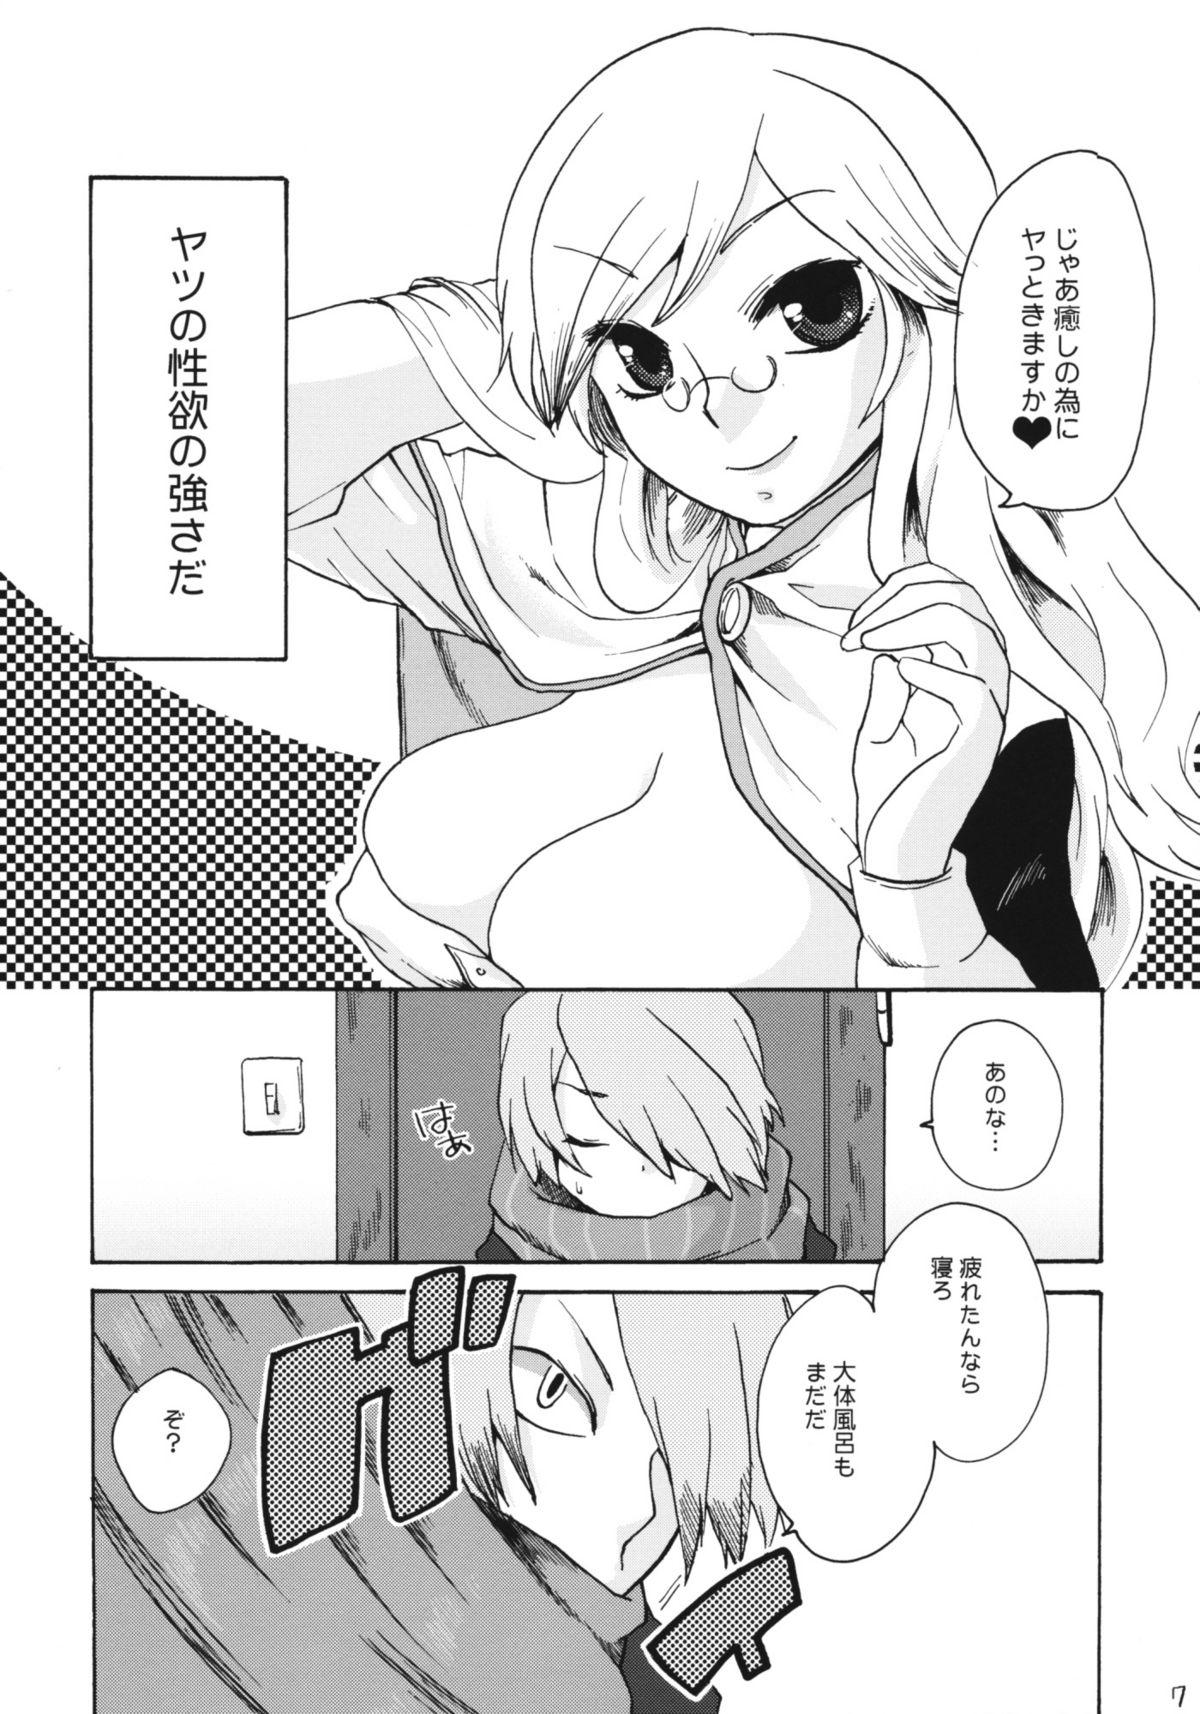 Movie In You And Me - 7th dragon Sharing - Page 6